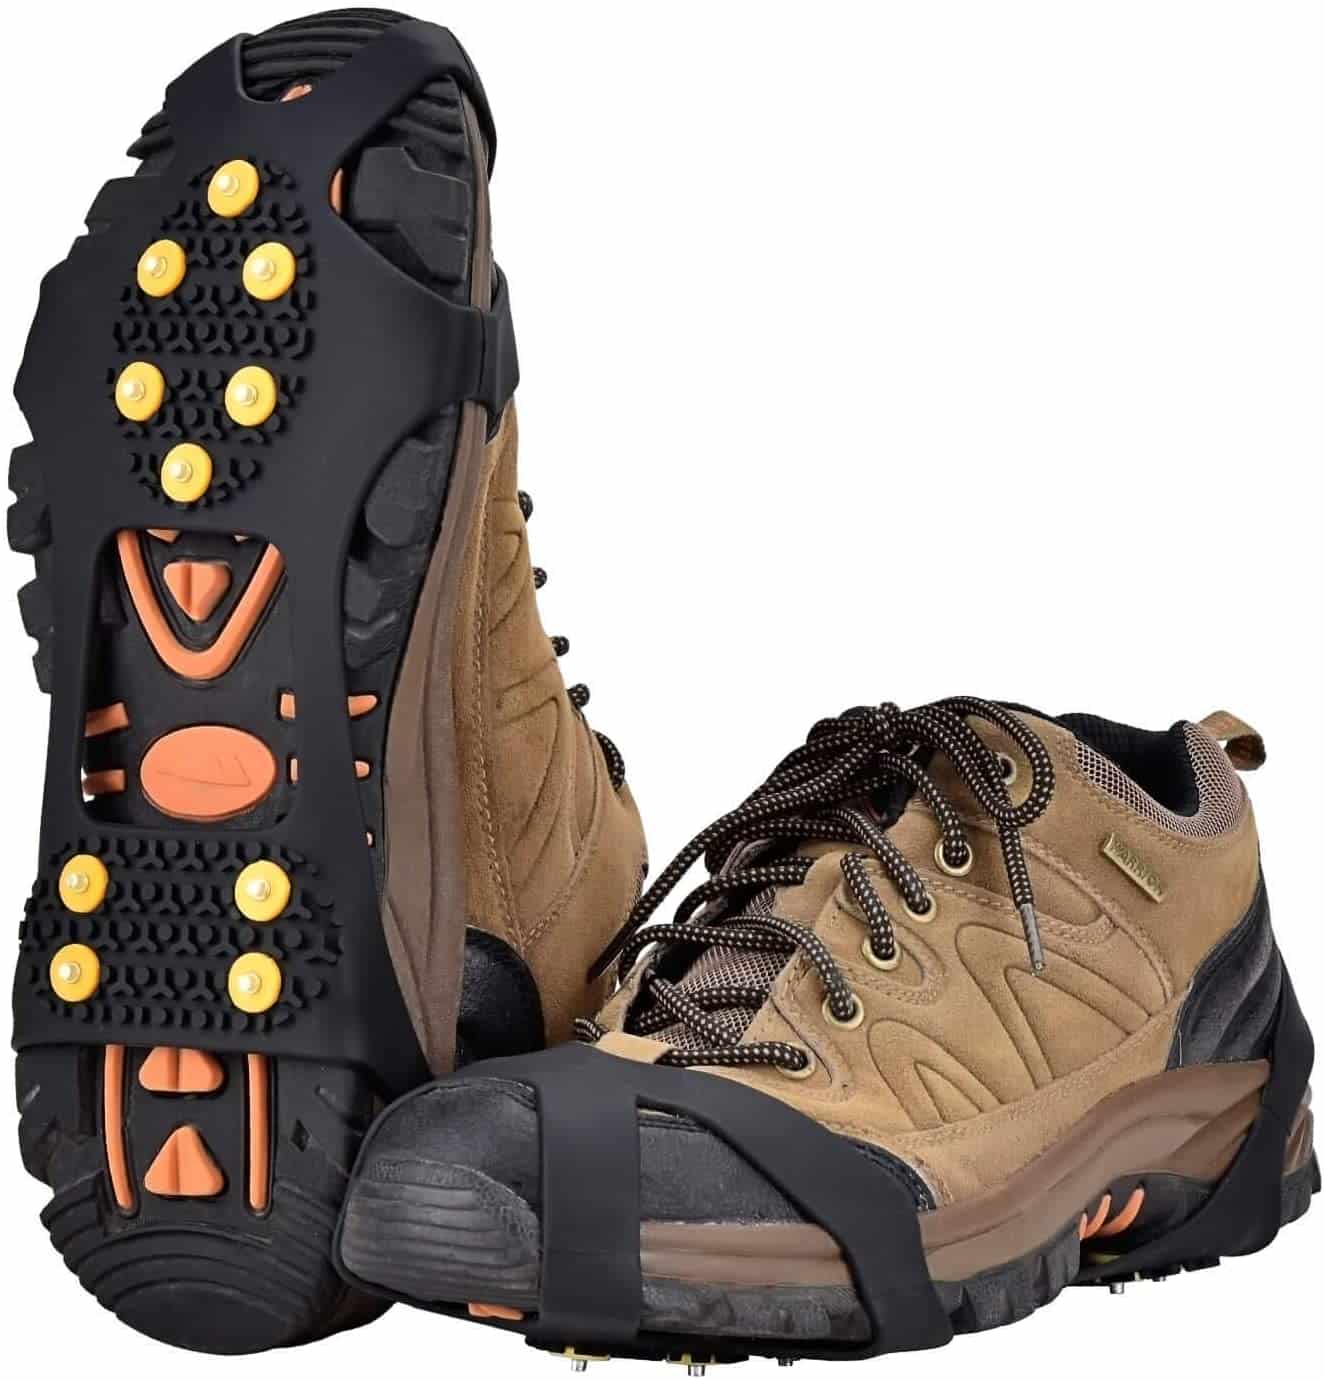 10 Best Ice Cleats For Shoes Reviews | Ice Trekkers And Spikes For Shoes